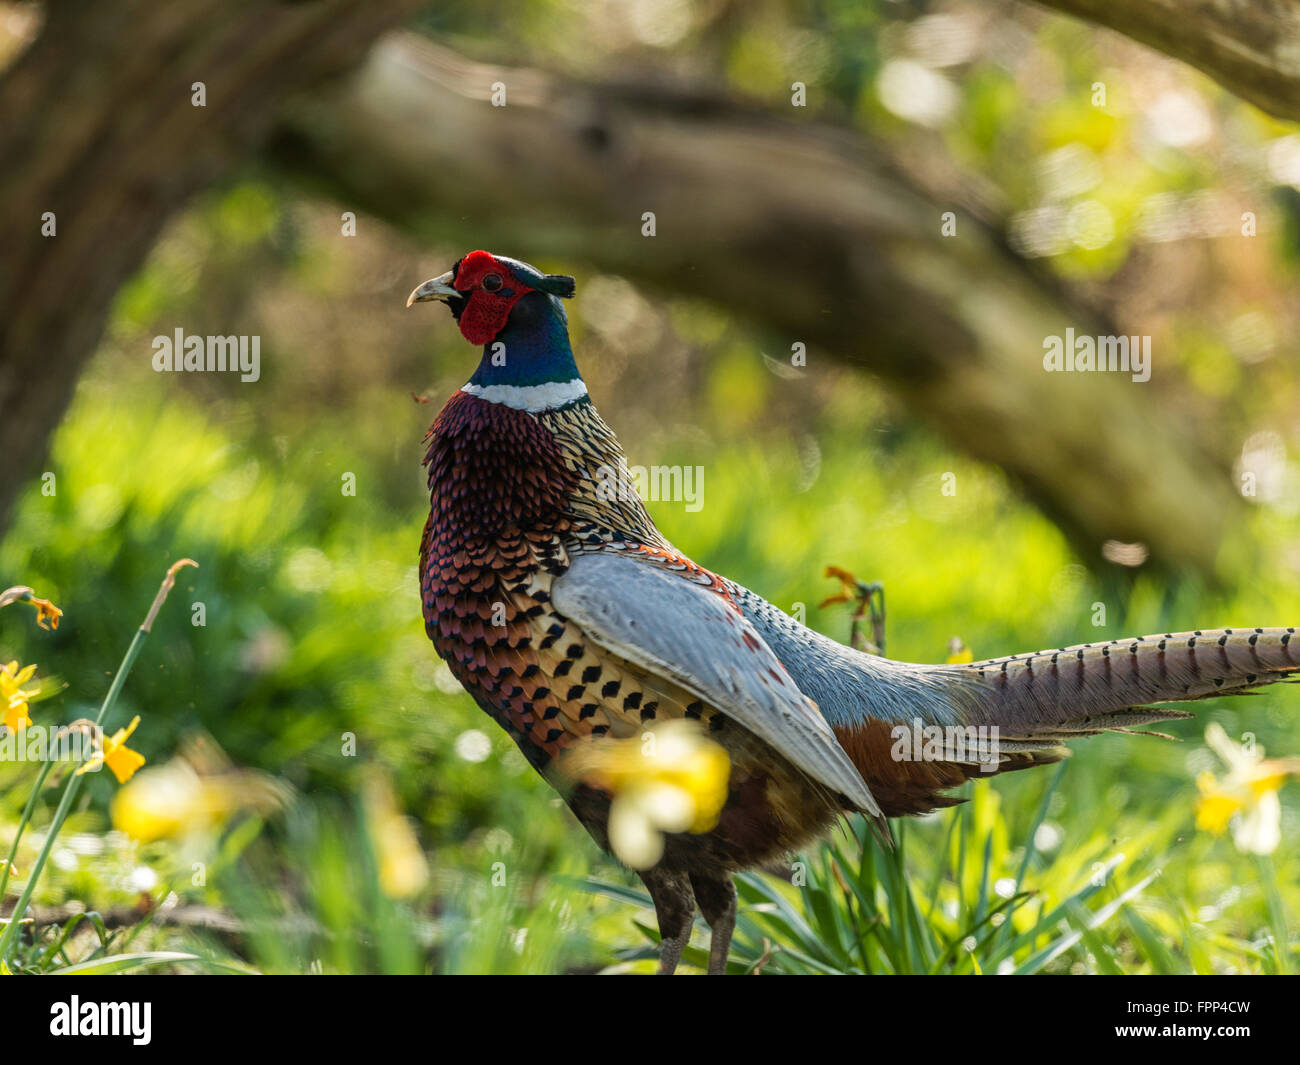 Beautiful Male Ring-necked Pheasant (Phasianus colchicus) posturing in natural woodland forest setting. Stock Photo